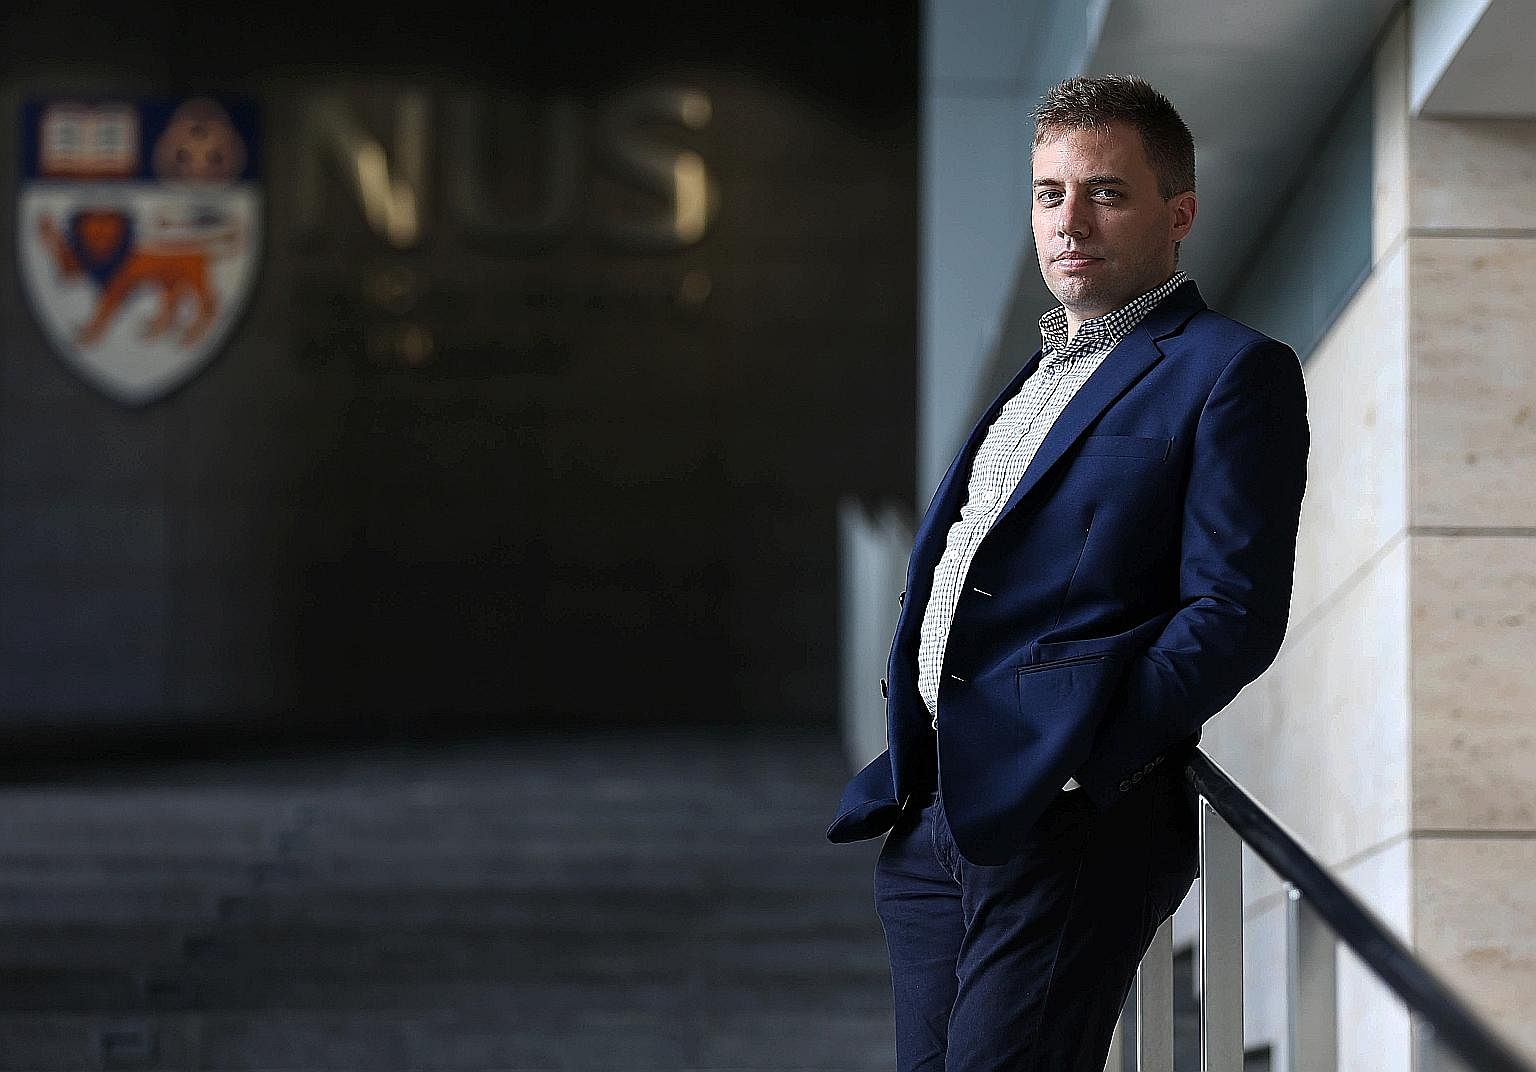 Associate Professor Alexander Cook, vice-dean for research at the NUS Saw Swee Hock School of Public Health, has been helping the Government with projections of various scenarios in the current coronavirus crisis. ST PHOTO: JOEL CHAN